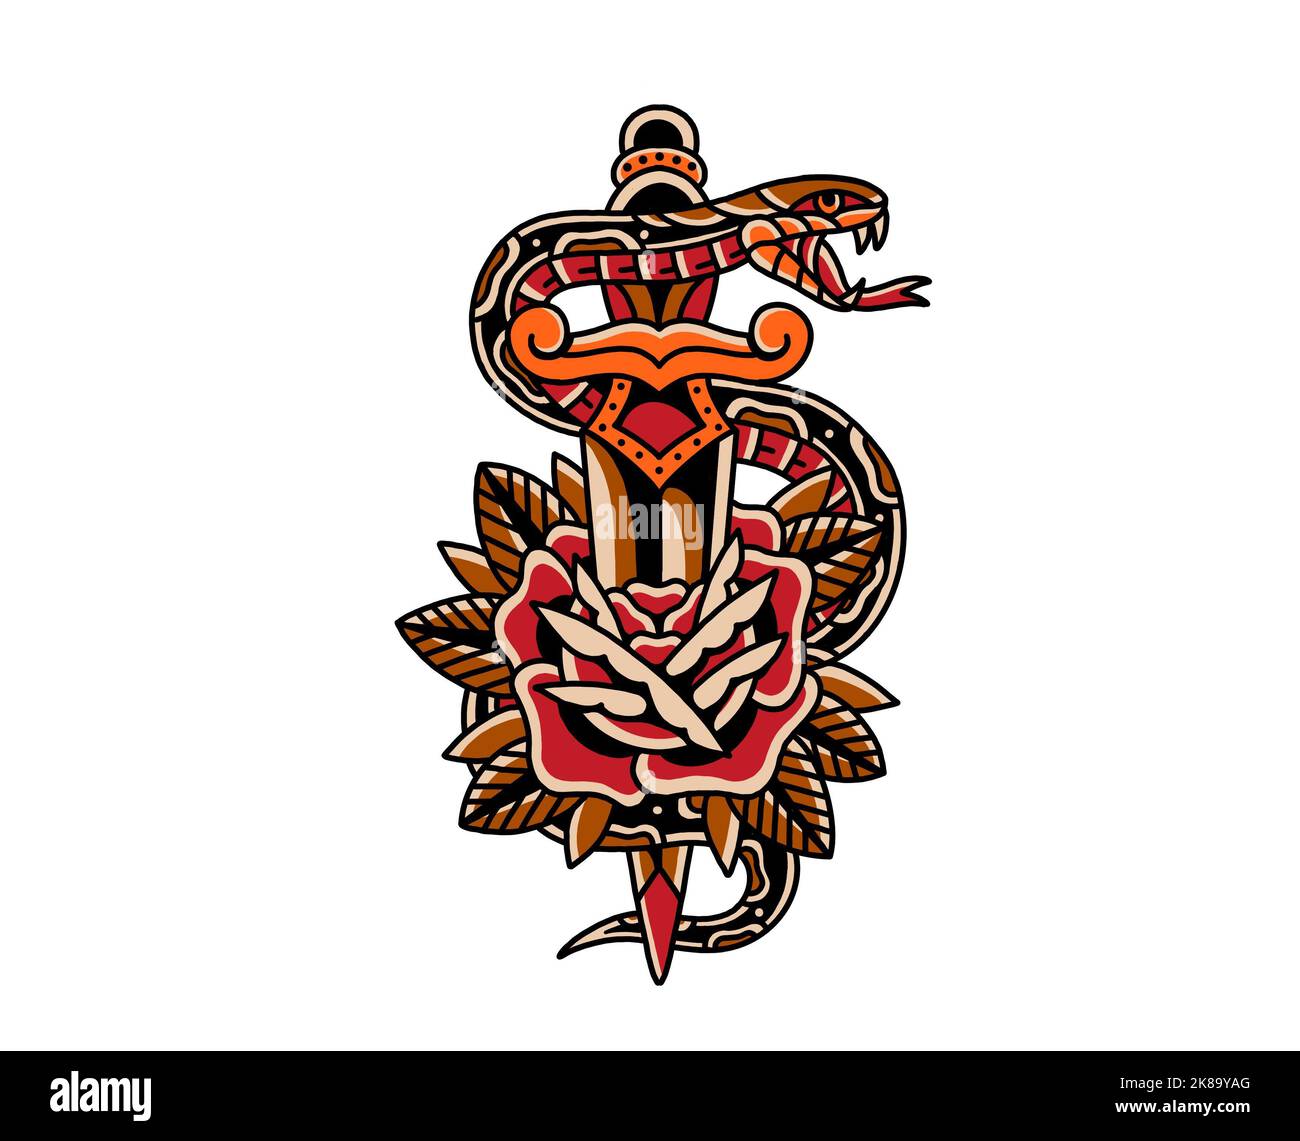 Old school traditional tattoo inspired cool graphic design illustration snake with dagger and rose for merchandise t shirts stickers wallpapers Stock Photo